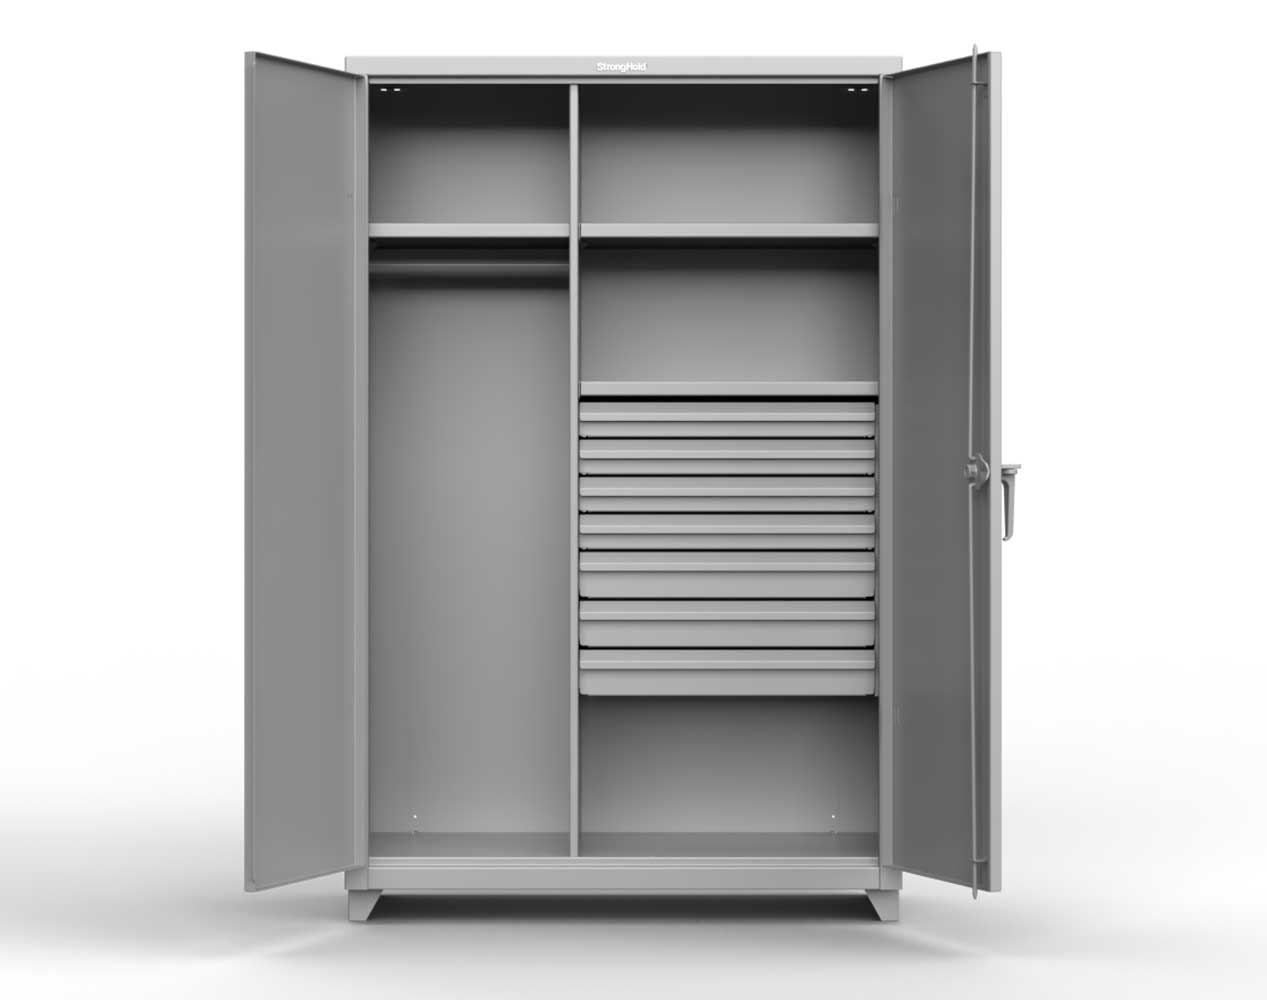 Extra Heavy Duty 14 GA Uniform Cabinet with 7 Drawers, 3 Shelves - 36 In. W x 24 In. D x 75 In. H